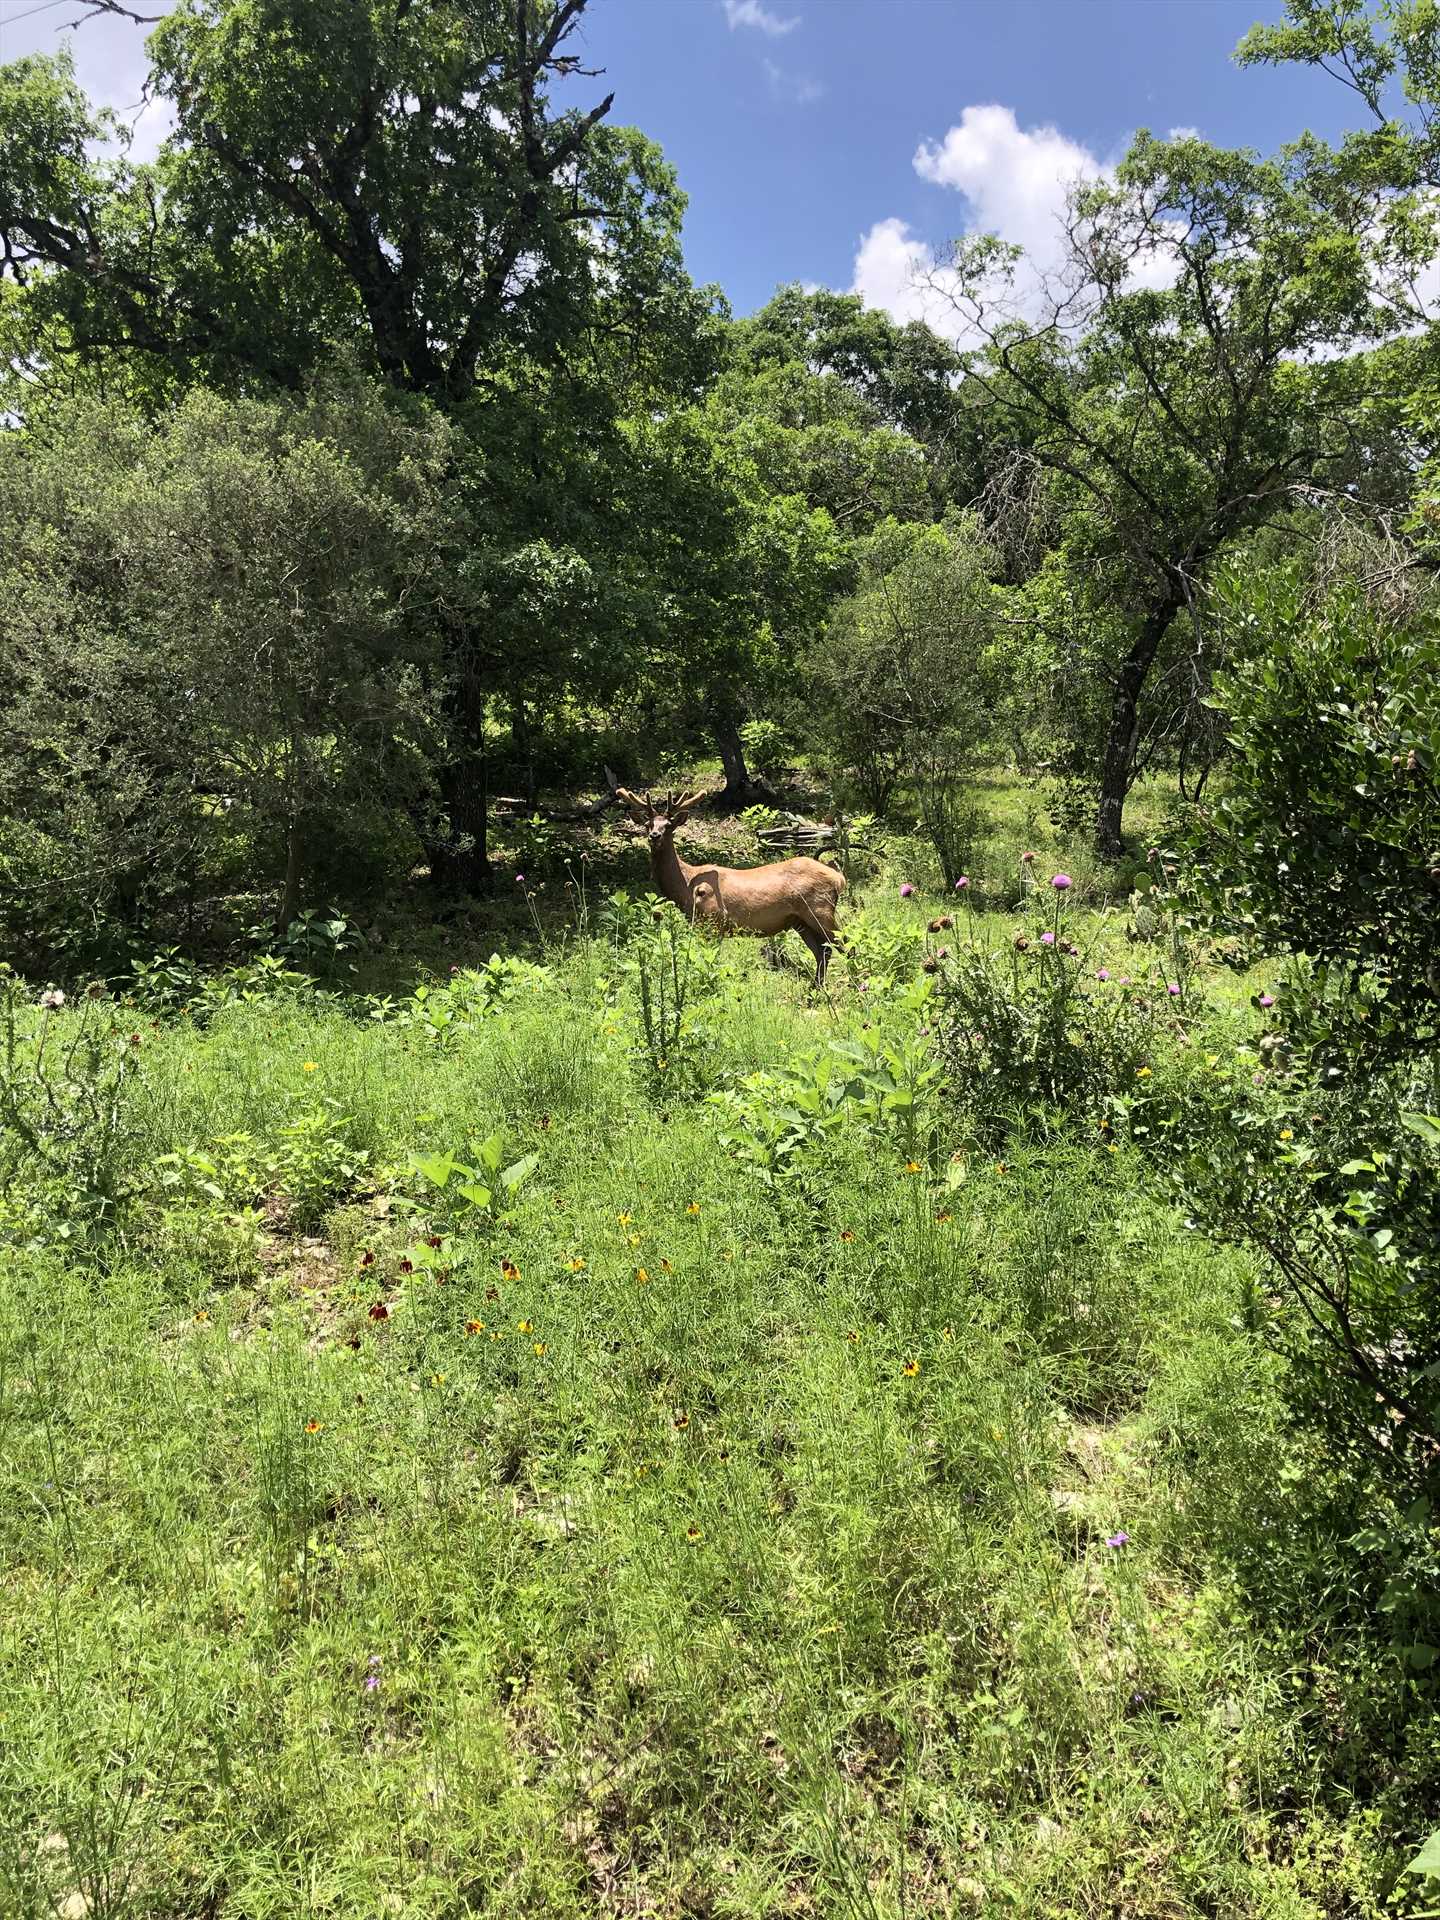                                                 Deer, elk, bison, and even a zebra call the ranch home, and our guests love the added thrill of spotting them!